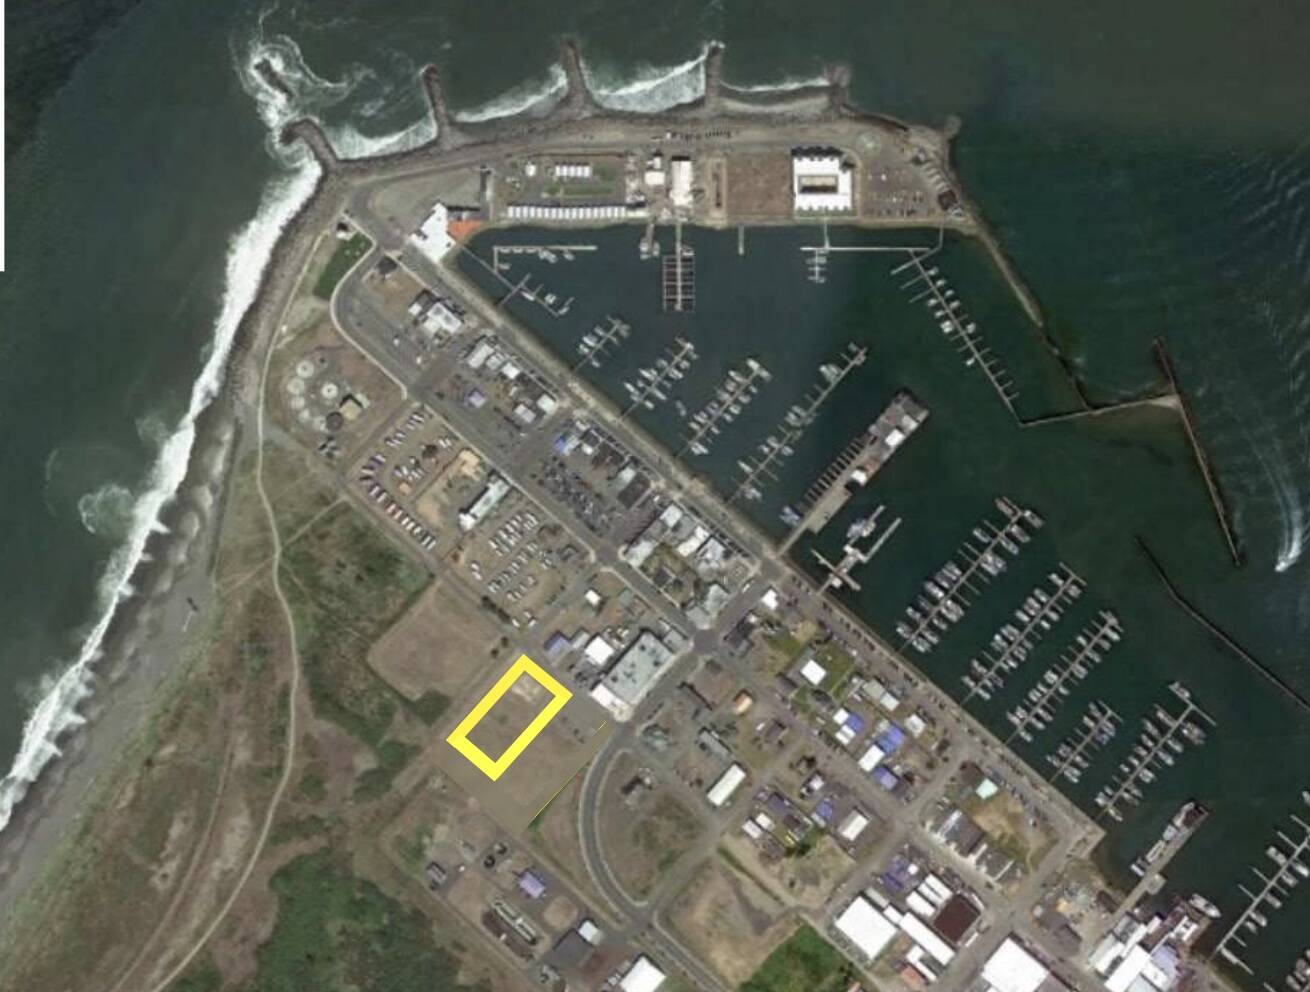 City of Westport
Westport plans to build a tsunami tower at the one-acre site highlighted in yellow, located a few blocks from the marina district.